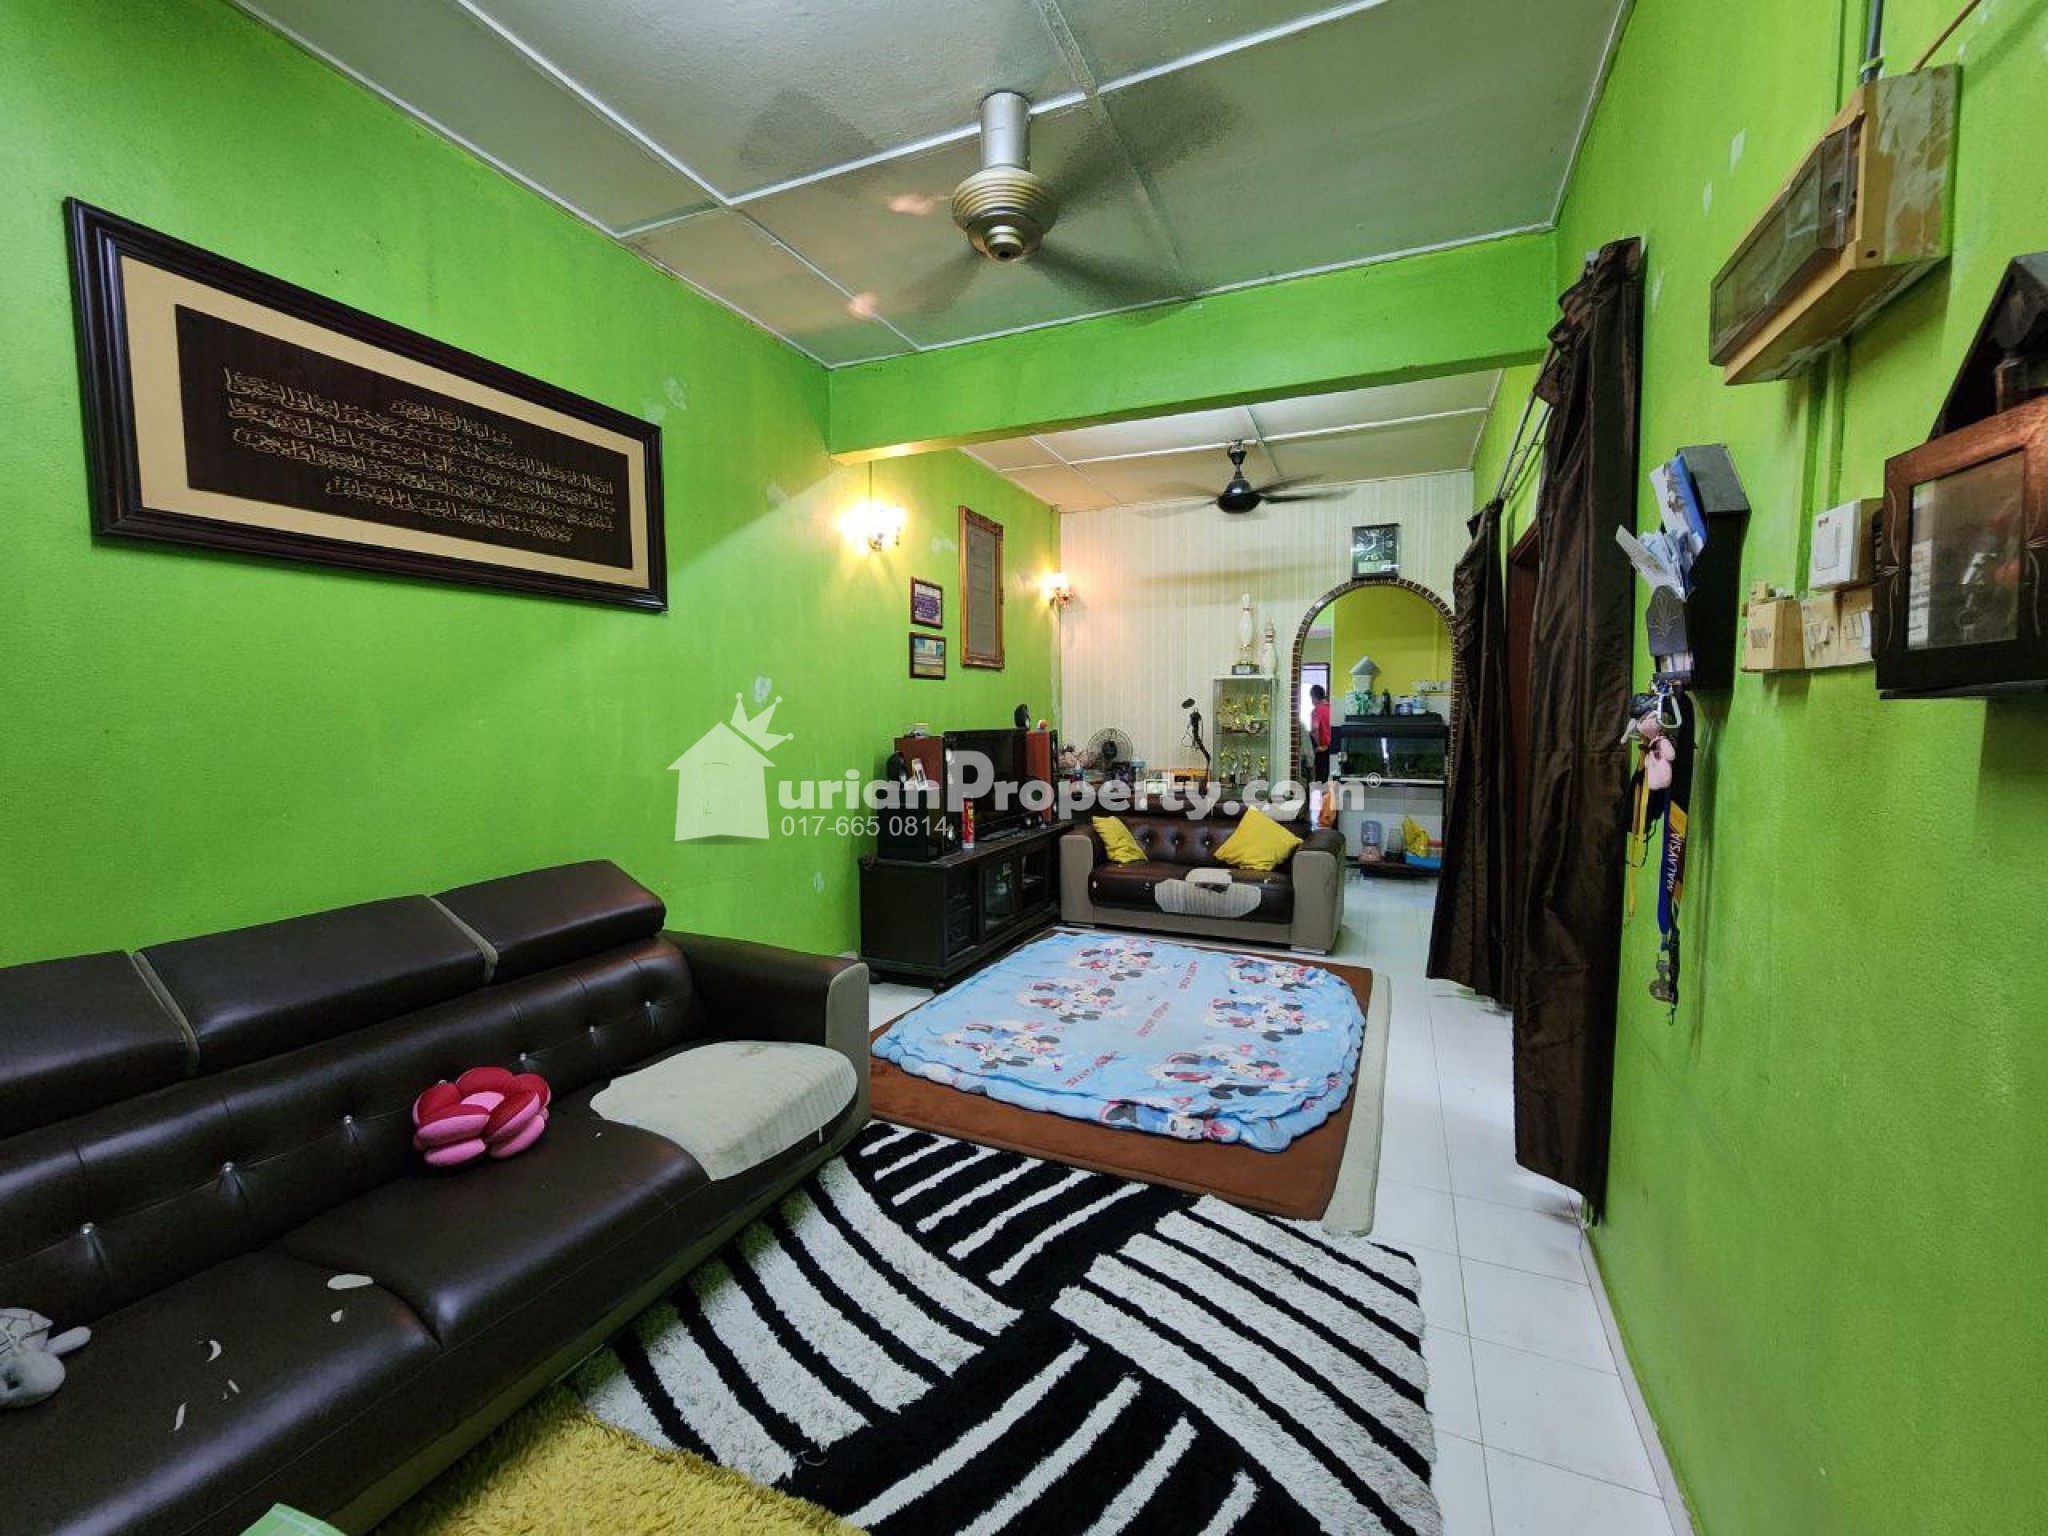 Terrace House For Sale at Bandar Rinching